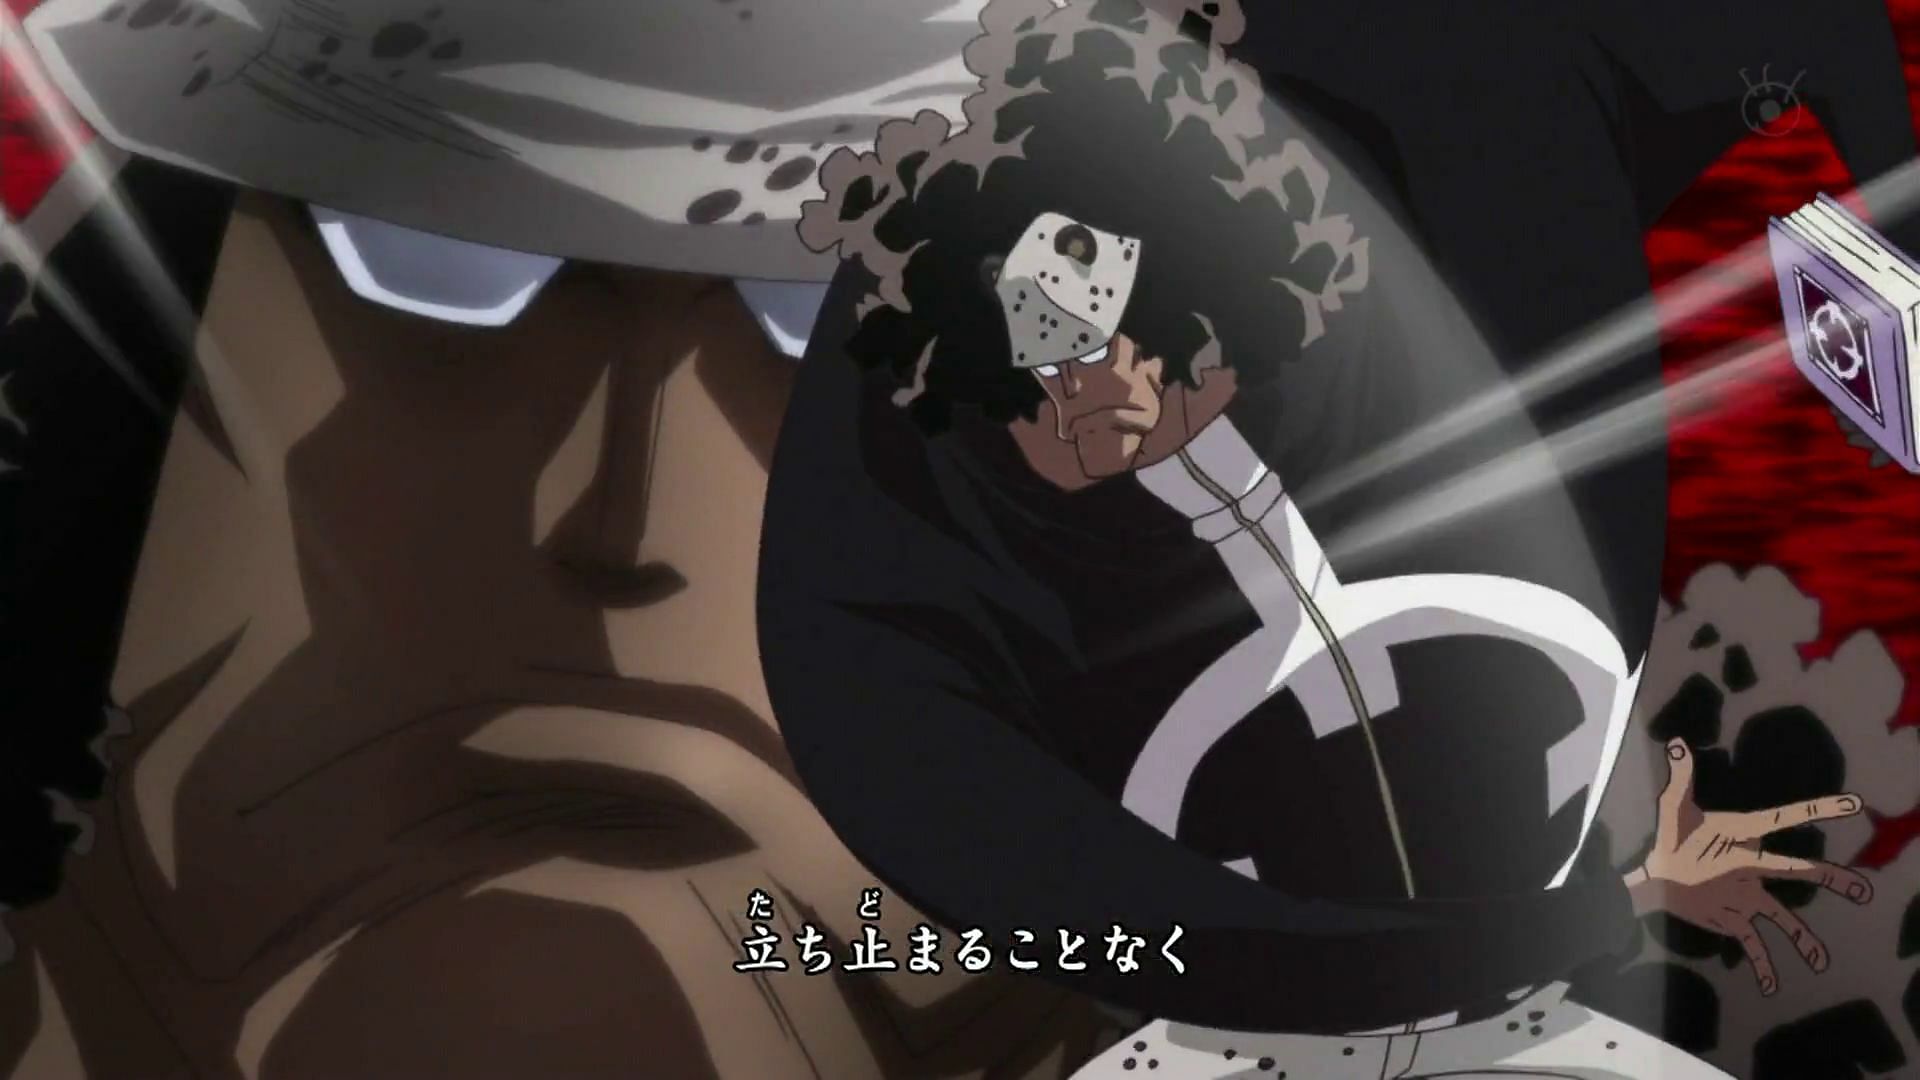 MADS Theory (1067 spoilers) : r/OnePiece